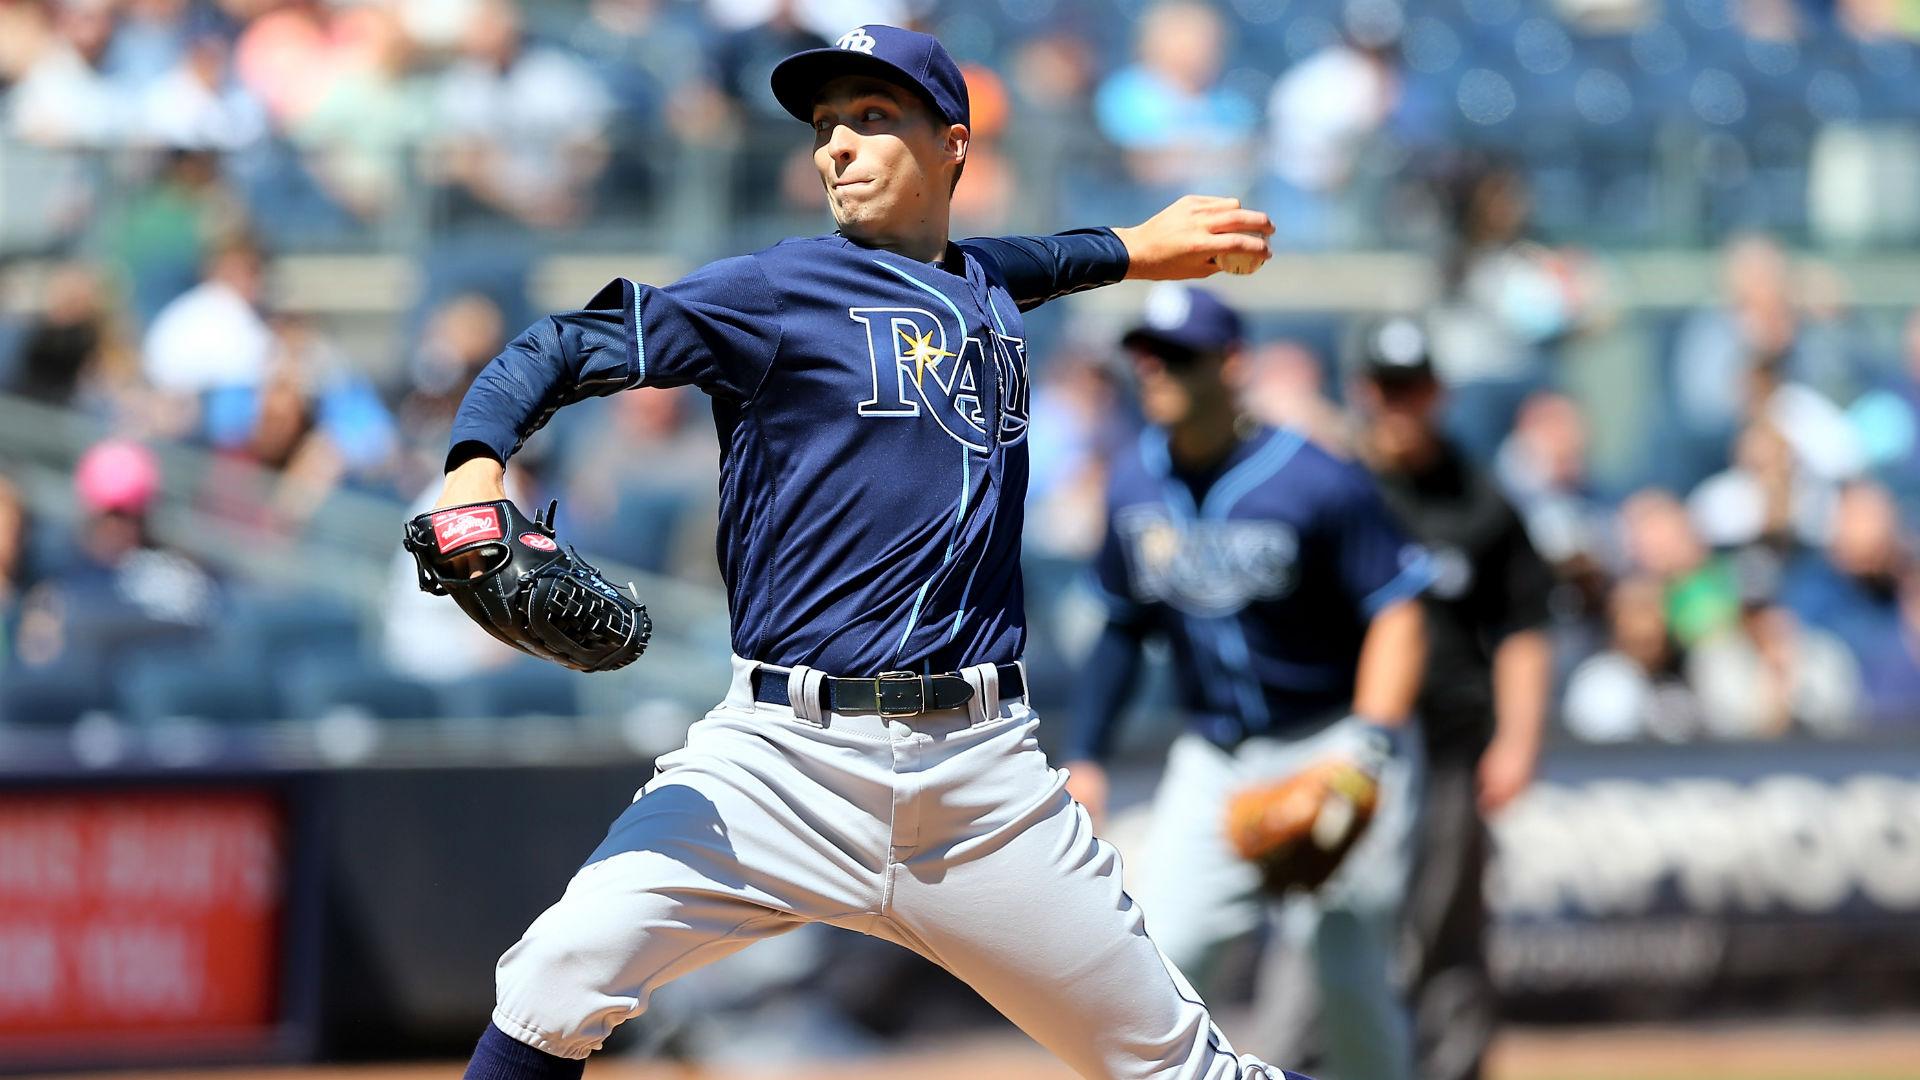 Blake Snell Scouting Report: Rays rookie shows why he's a top